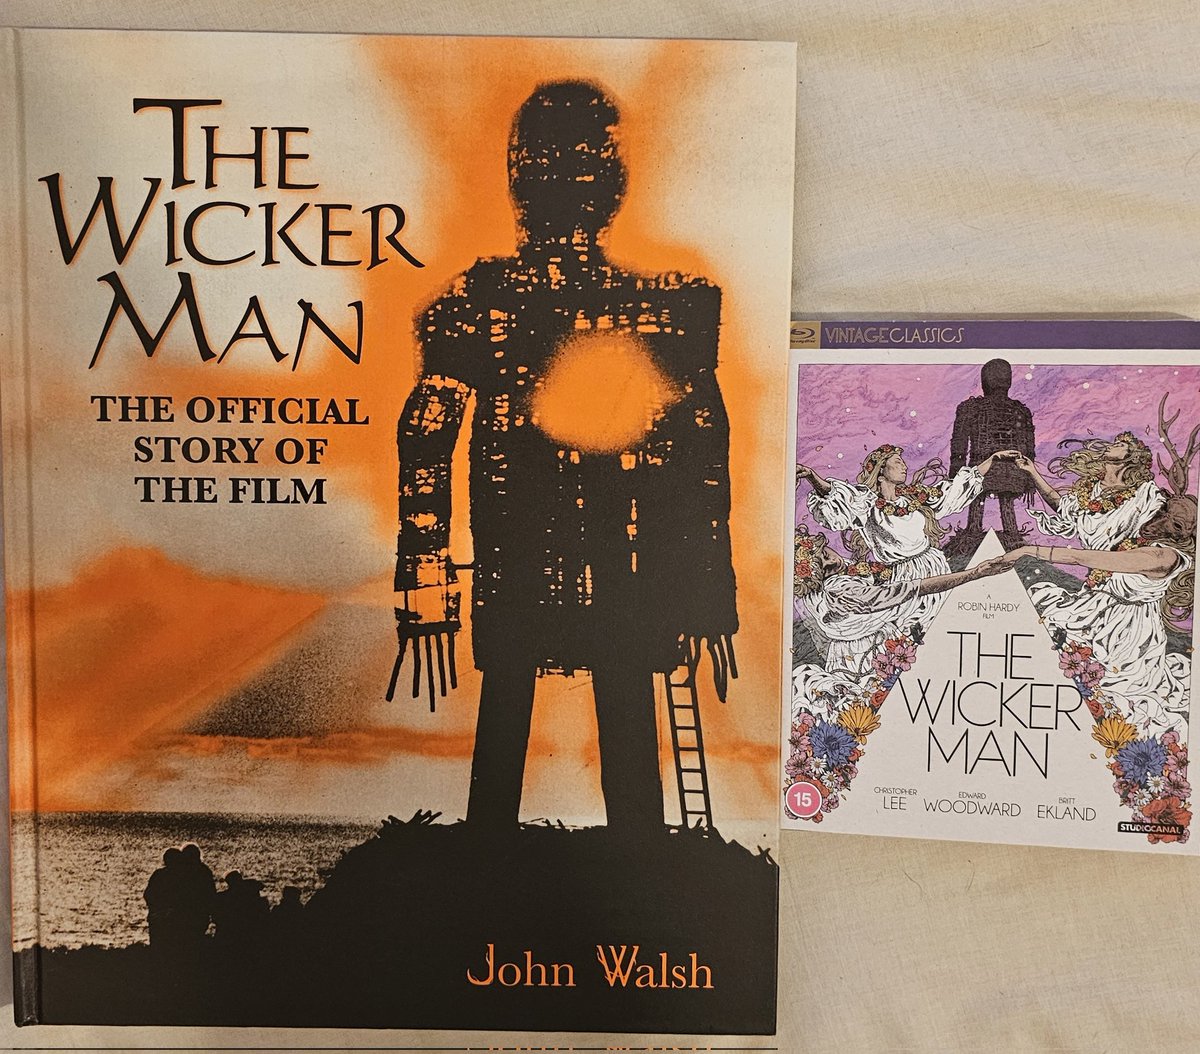 Despite everything, I had a lovely delivery today. I did not expect this book to be so bloody mahoosive and TBH I'm happy with the blu and not the 4K #TheWickerMan 

(@Charlot61886066 bought from our friend 'Brad' - bloody have to watch it now 😘)